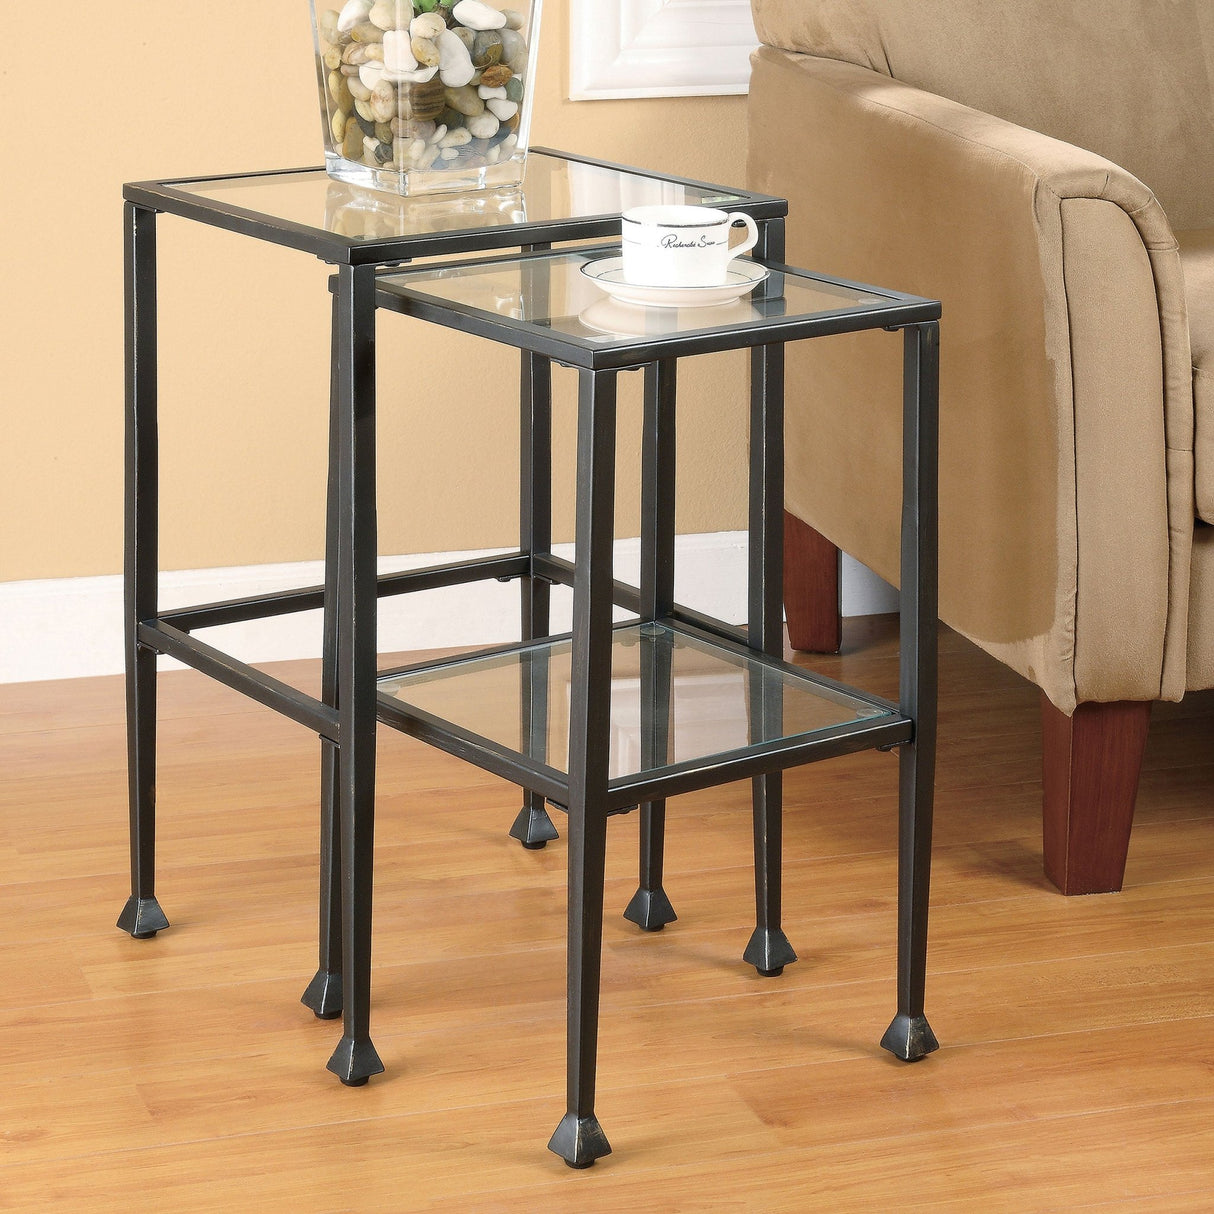 2 Pc Nesting Table - Leilani 2-piece Glass Top Nesting Tables Black